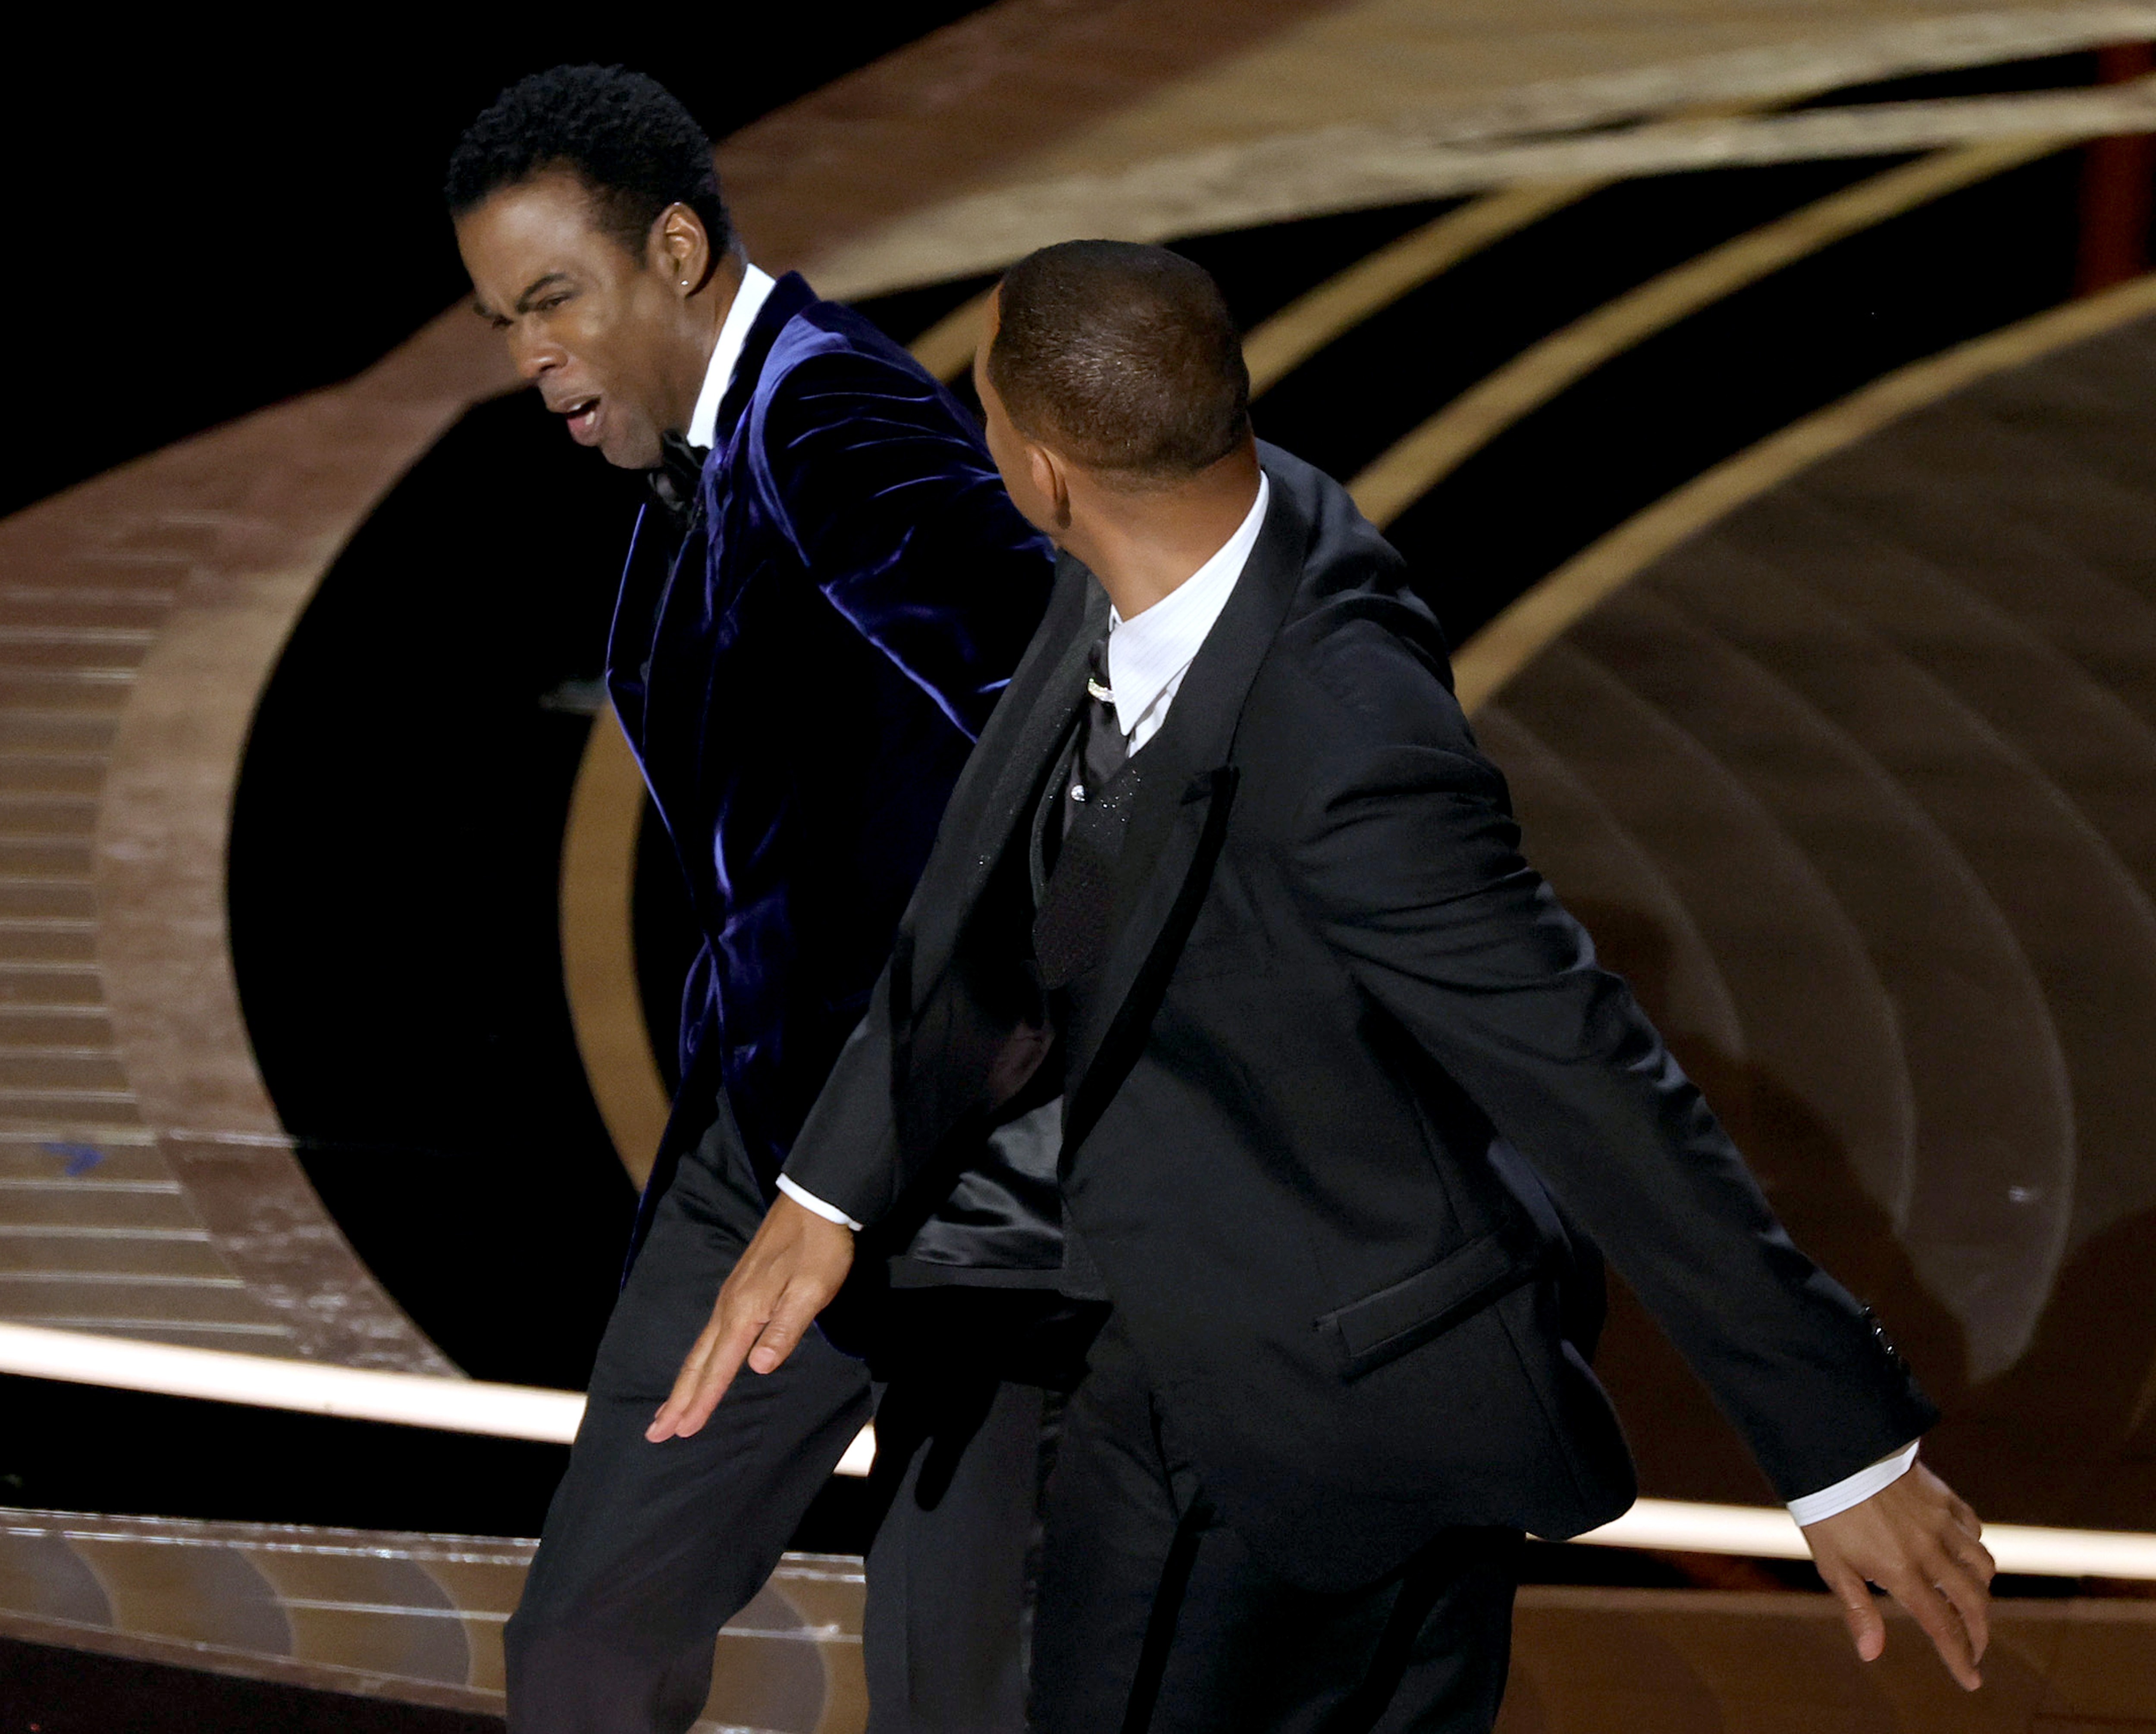 HOLLYWOOD, CALIFORNIA - MARCH 27: (L-R) Chris Rock and Will Smith are seen onstage during the 94th Annual Academy Awards at Dolby Theatre on March 27, 2022 in Hollywood, California. (Photo by Neilson Barnard/Getty Images) (Foto: Getty Images)